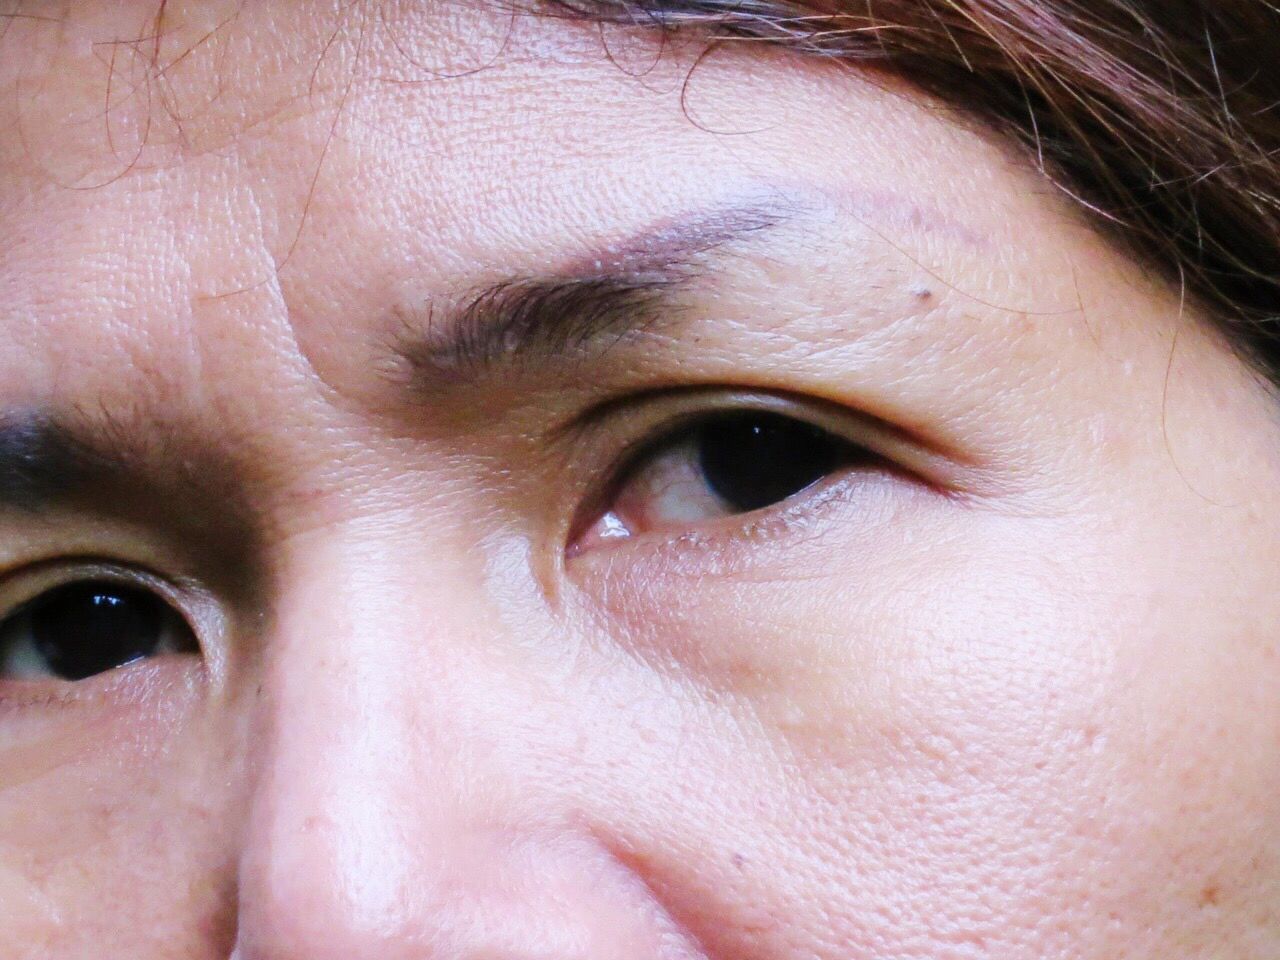 EXTREME CLOSE UP OF YOUNG WOMAN EYE